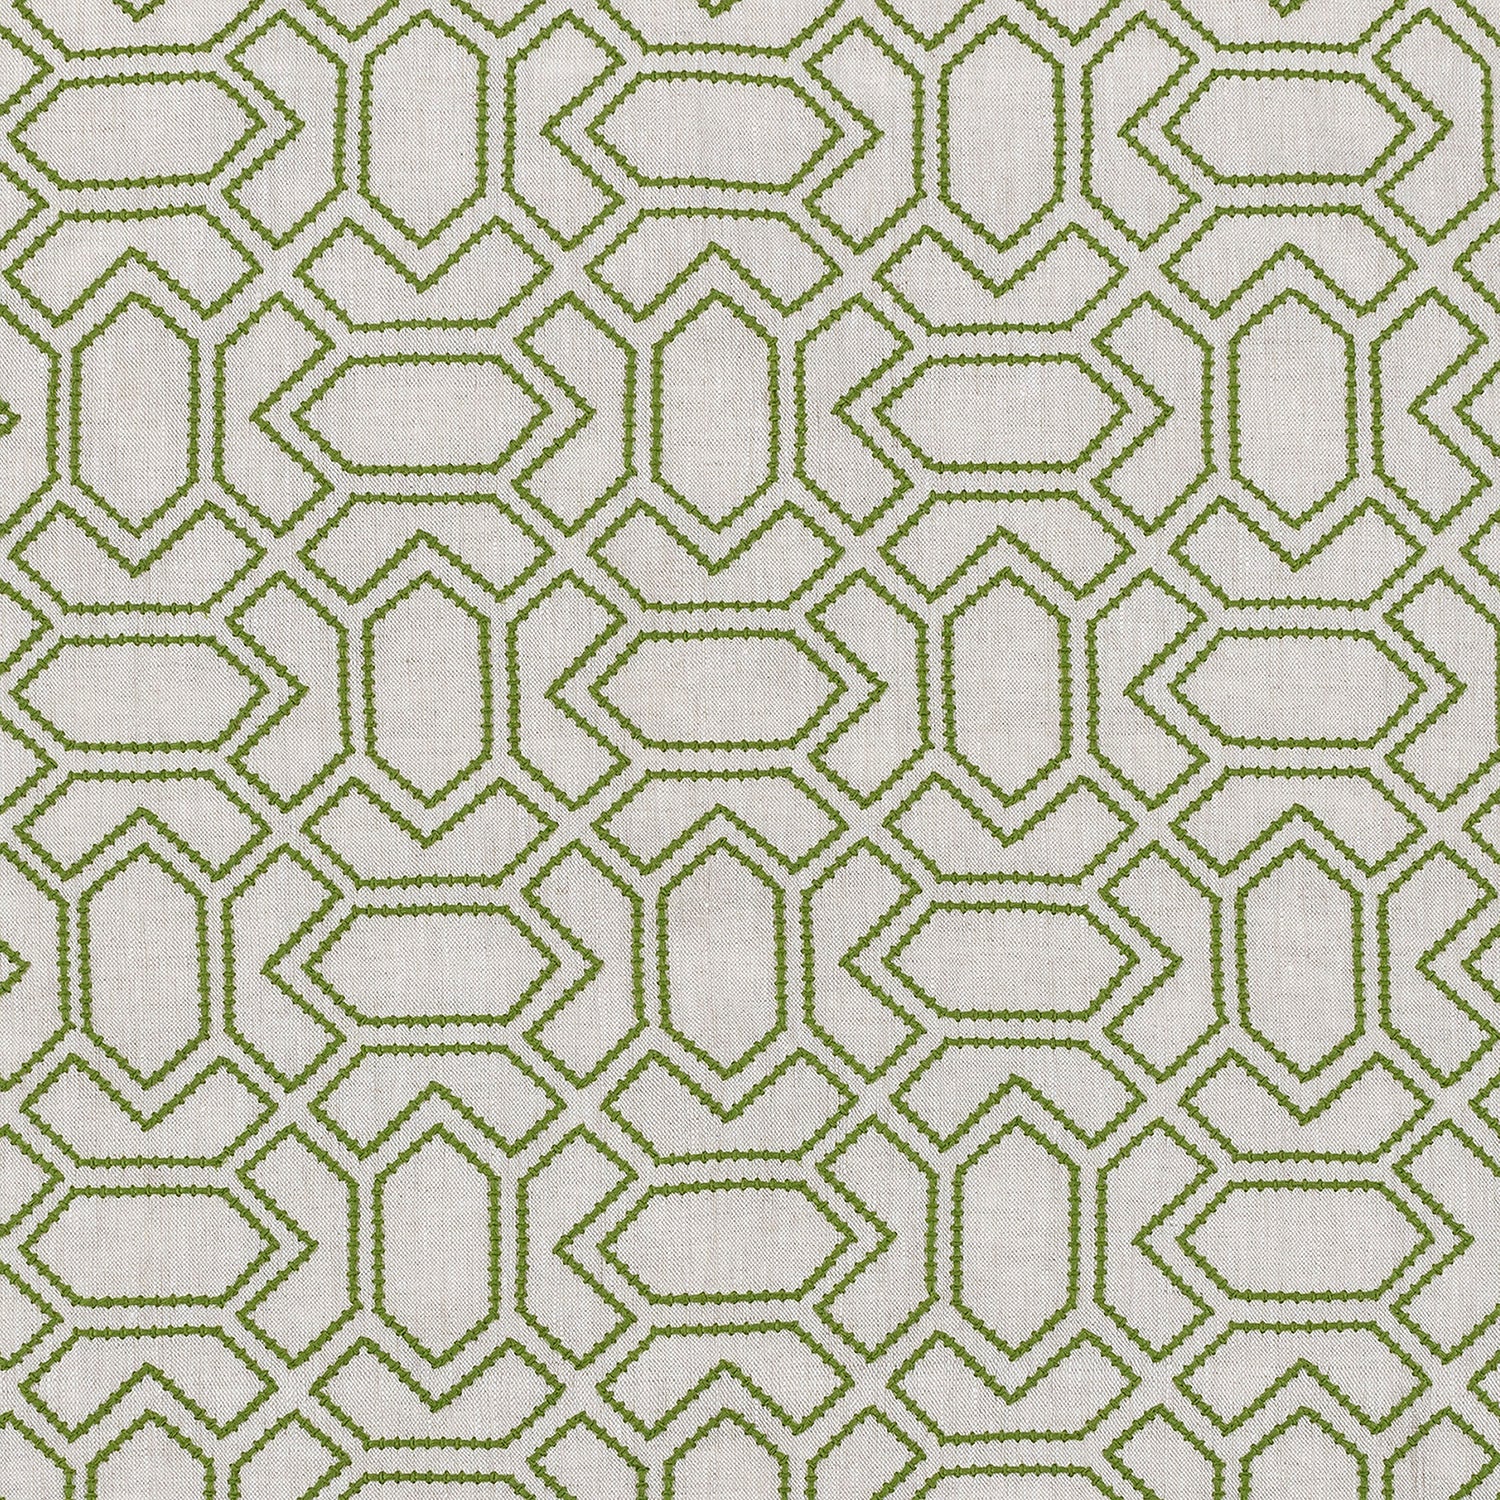 Fabric with an embroidered geometric grid print in olive on a light gray field.